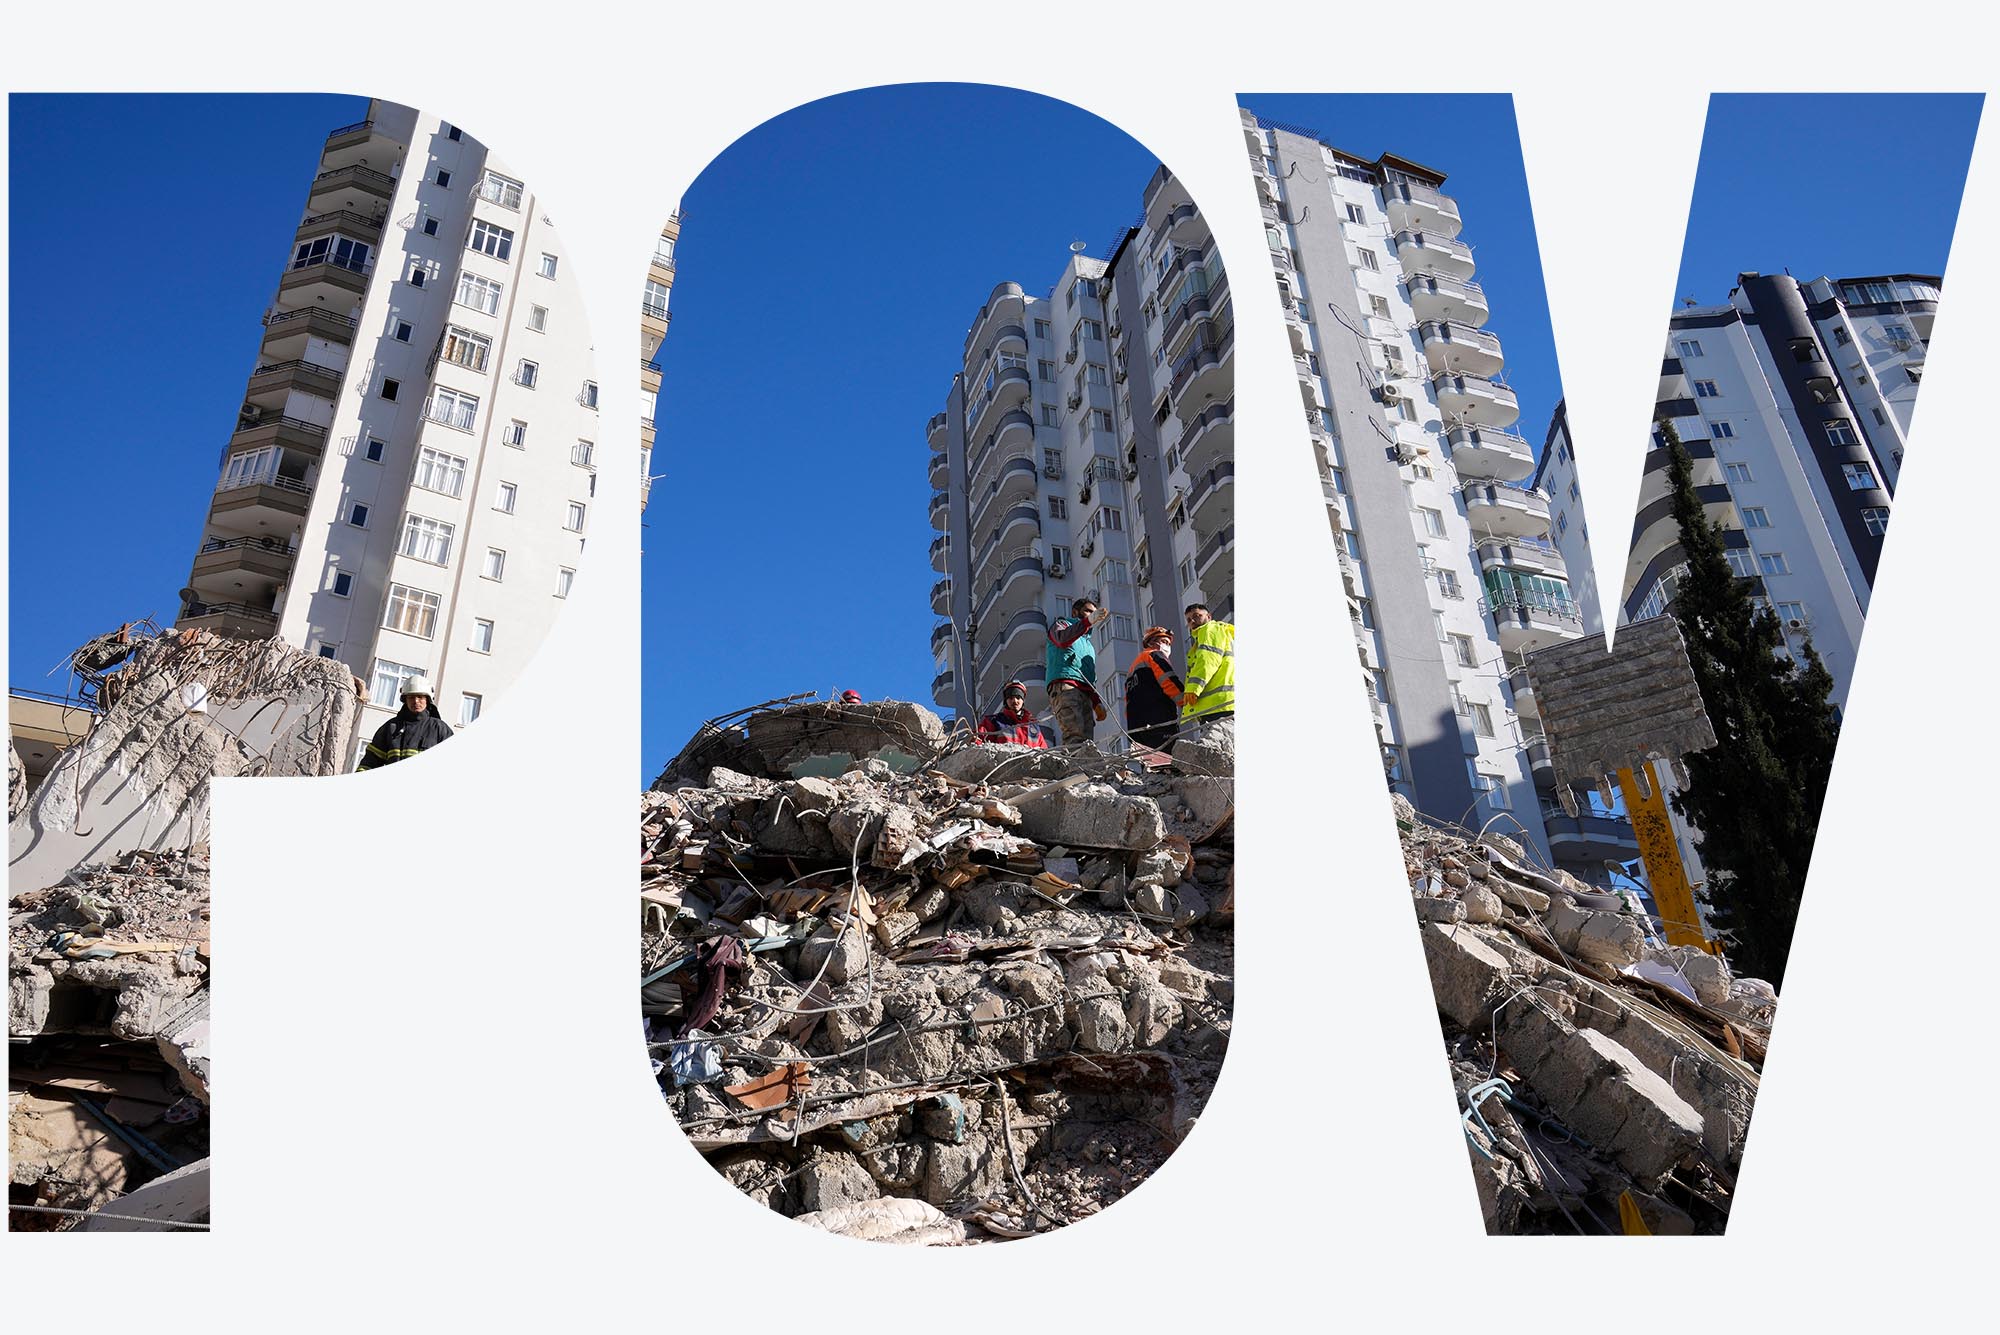 The letters POV are outlined and the background contains images of collapsed buildings from the recent earthquakes in Turkey and Syria